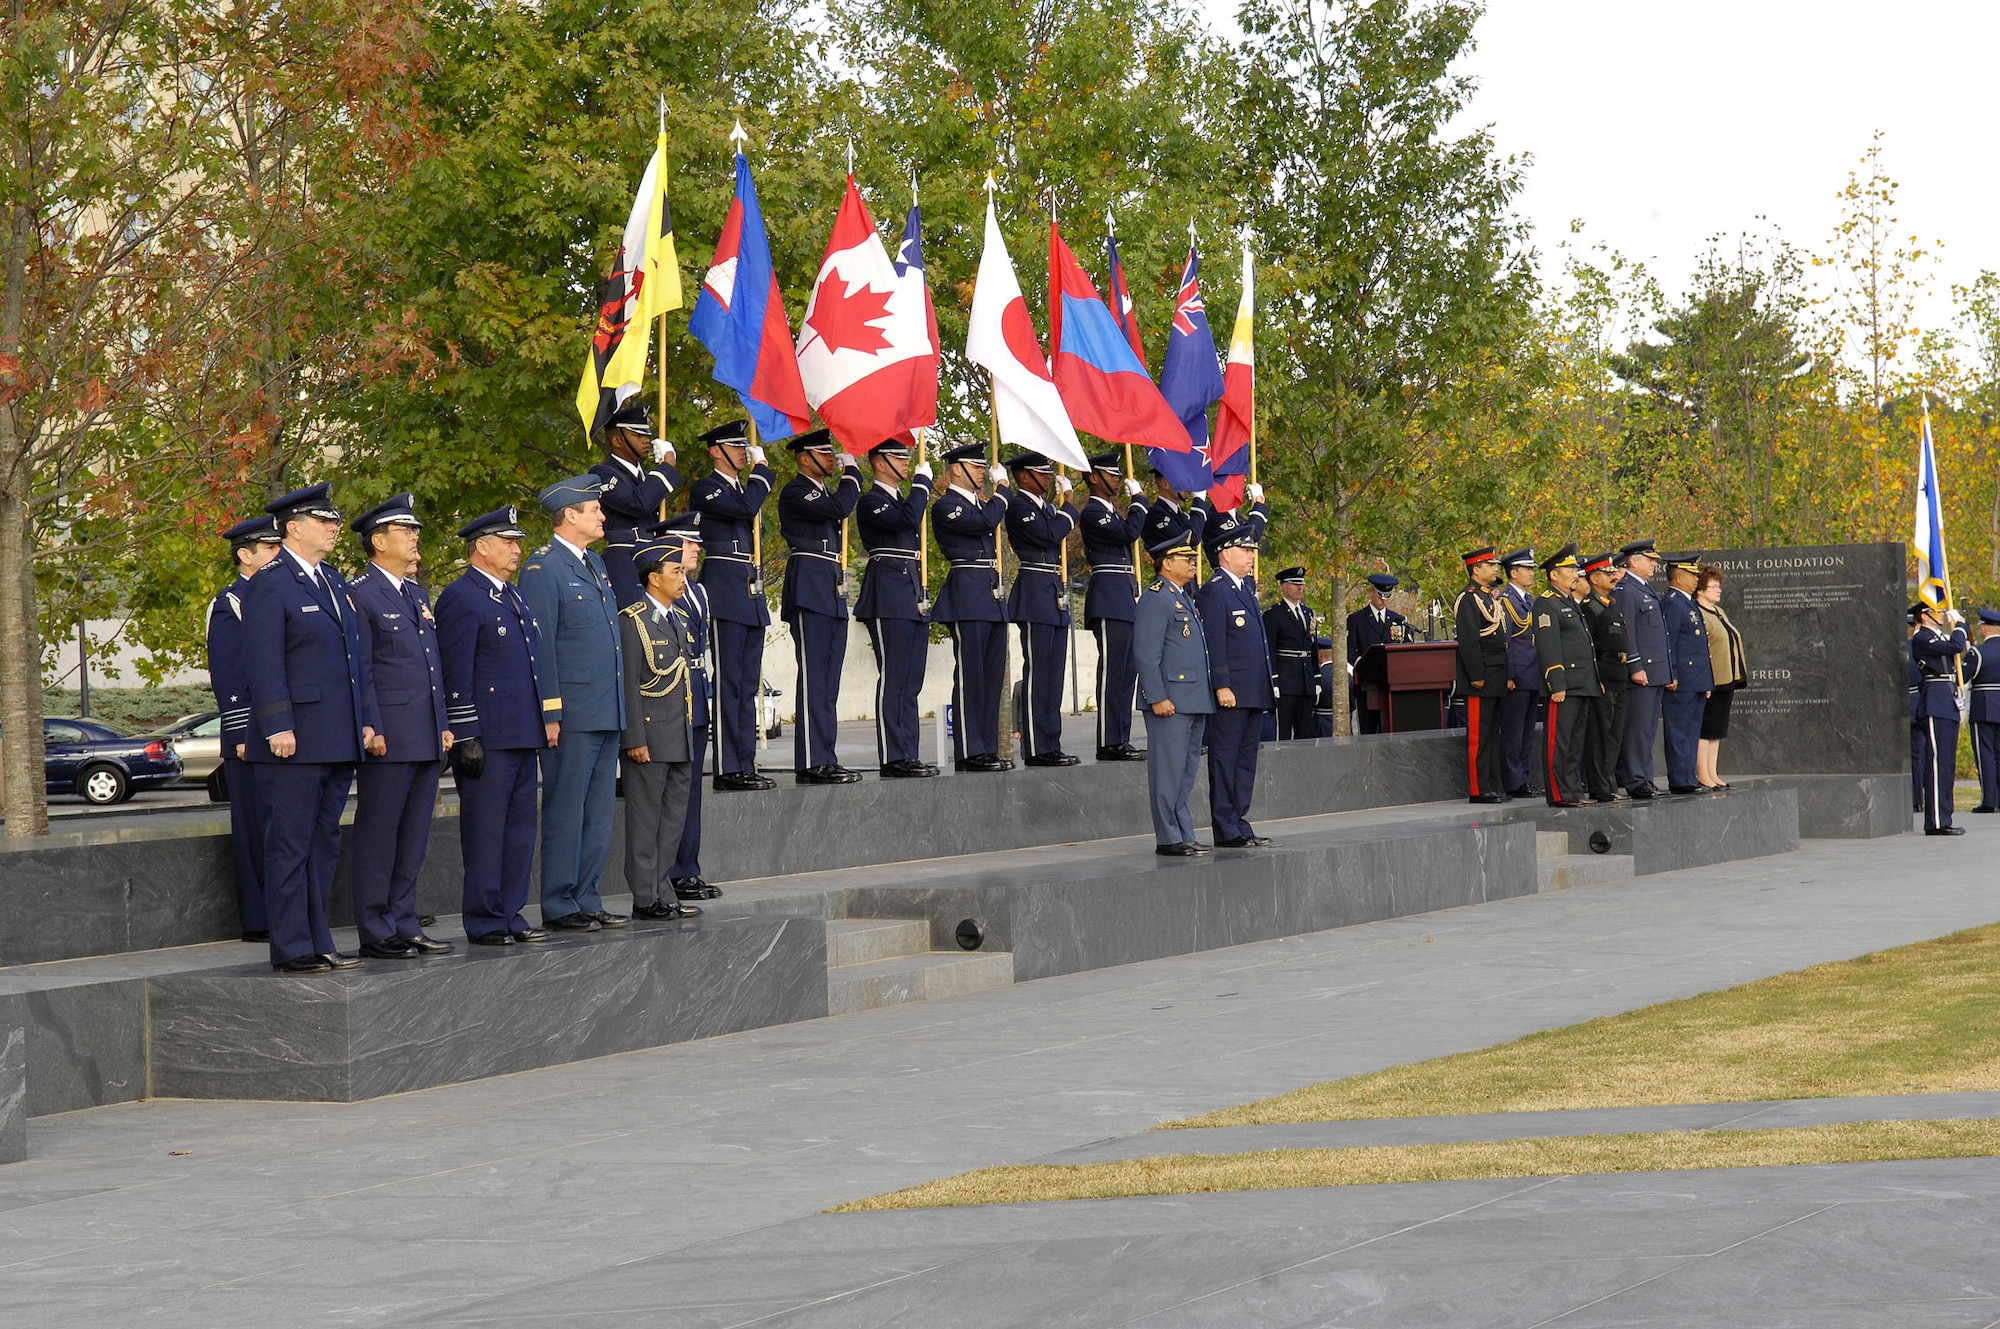 Air Force Chief of Staff Gen. T. Michael Moseley and Lt. Gen. Soeung Samnang, Cambodian Royal Air Force commander, attend a a foreign dignitary arrival and wreath-laying ceremony at the Air Force Memorial in Arlington, Va., on Tuesday, Oct. 24. The Pacific air chiefs from nine countries attended the event with Gen. Samnang representing them when he assisted General Moseley in the inspection of the troops. (U.S. Air Force photo/Senior Airman Desiree Andrejcik)
